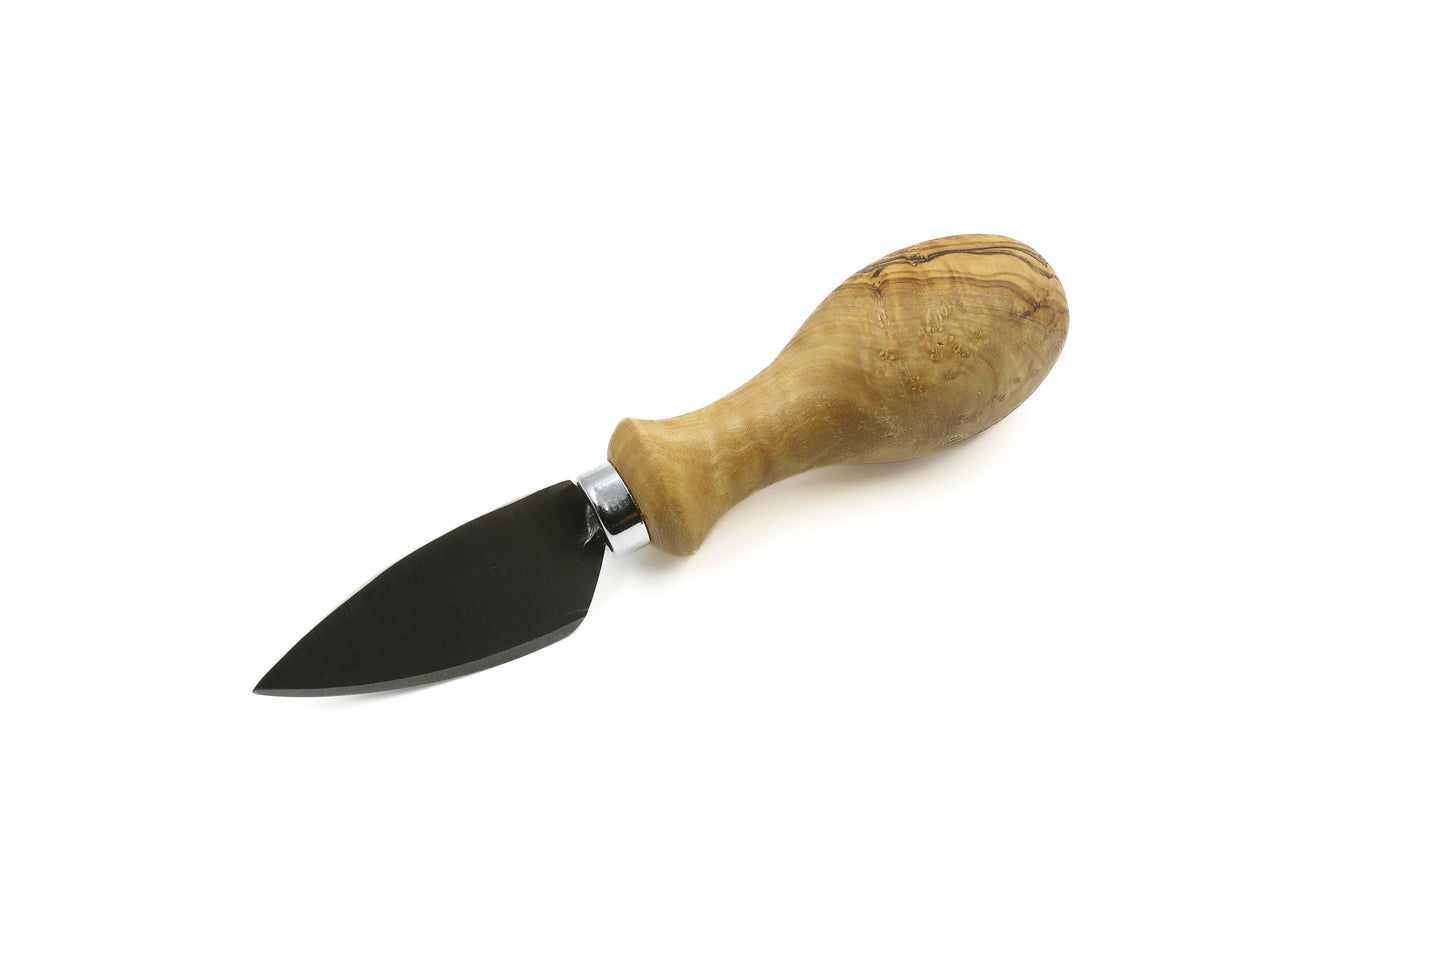 Rustic olive wood cheese knife collection for serving a variety of cheeses